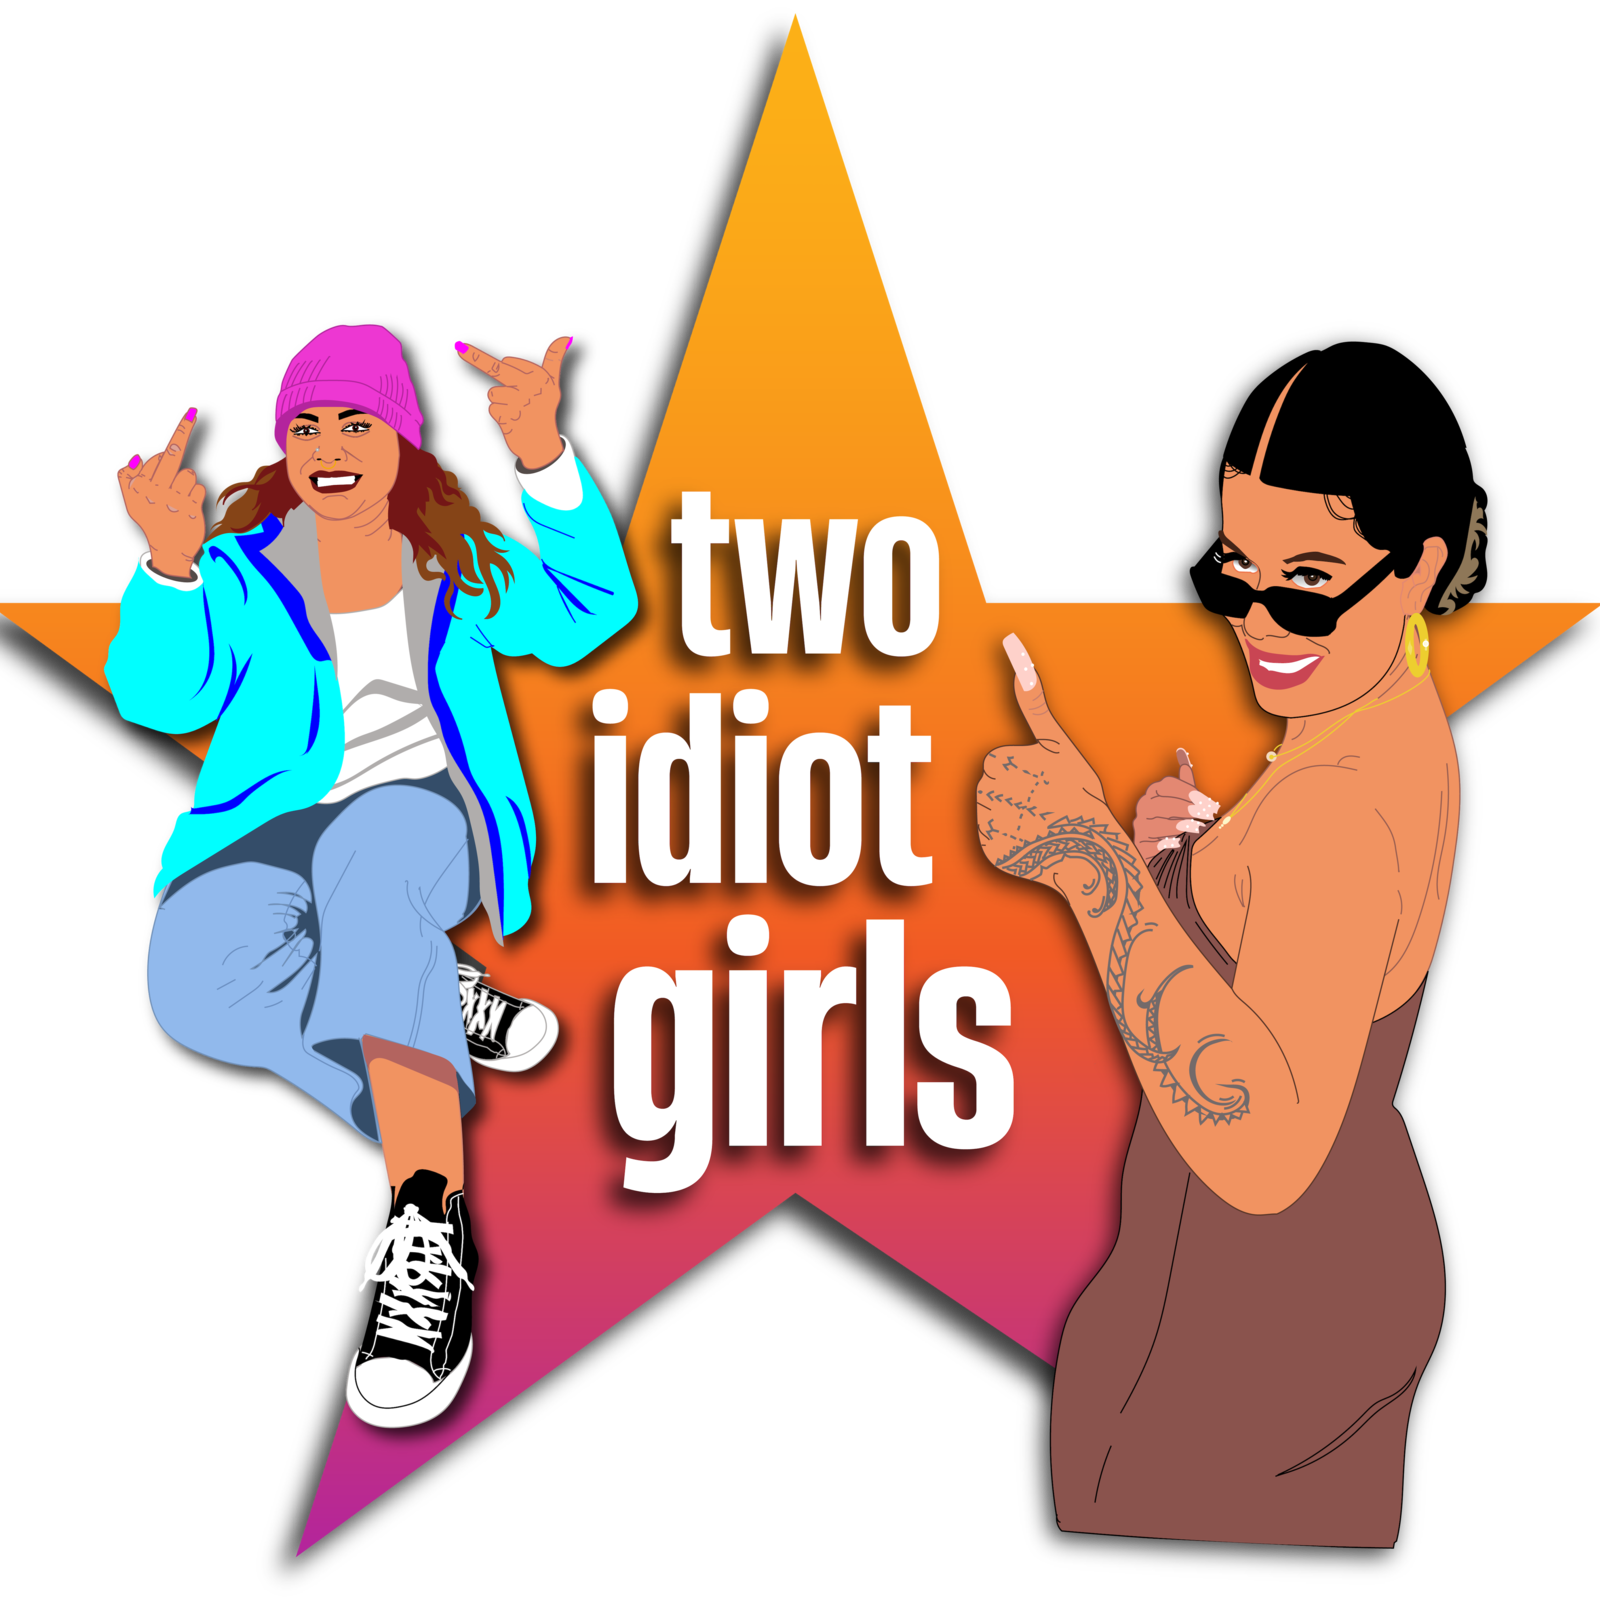 S2 Ep49: Sending Nudes From the Toilet?? Girl WAT?! & reading your online dating experiences!